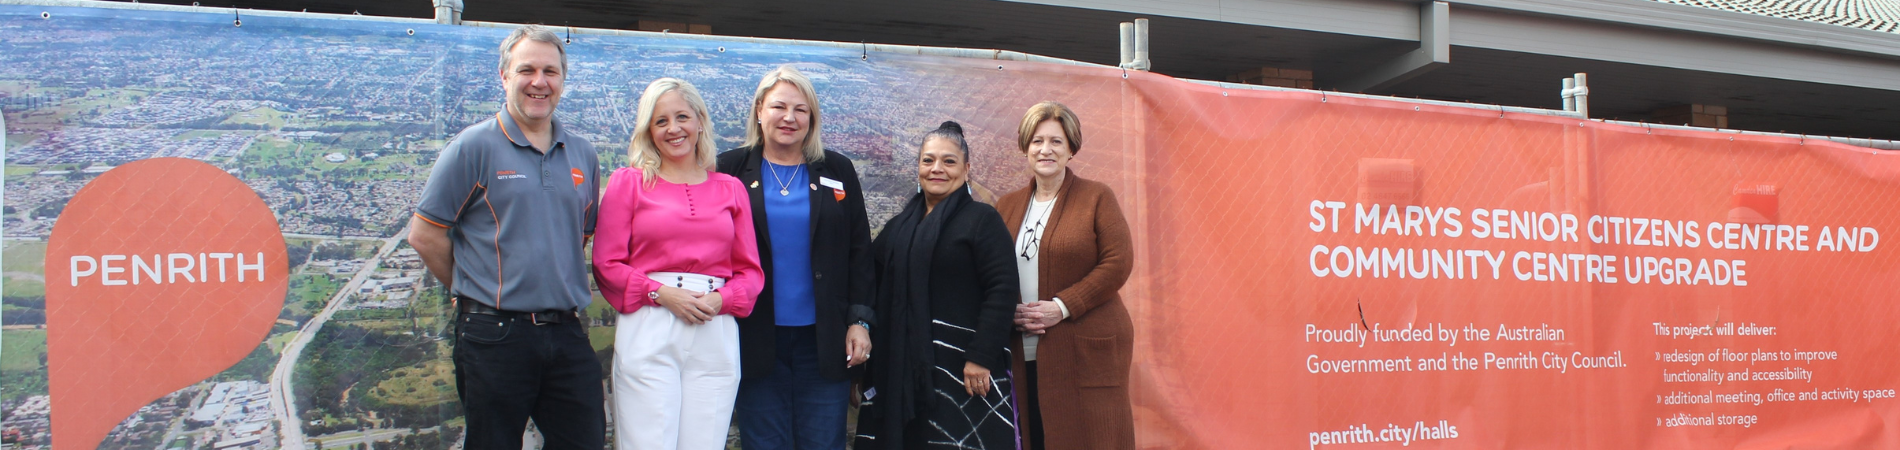 Community Facilities and Recreation Manager Andrew Robinson, Member for Lindsay Melissa McIntosh, Penrith Mayor Tricia Hitchen, Nepean Multicultural Access Aged Care Coordinator Elizabeth Chavez, and Manager Laura Sardo.  